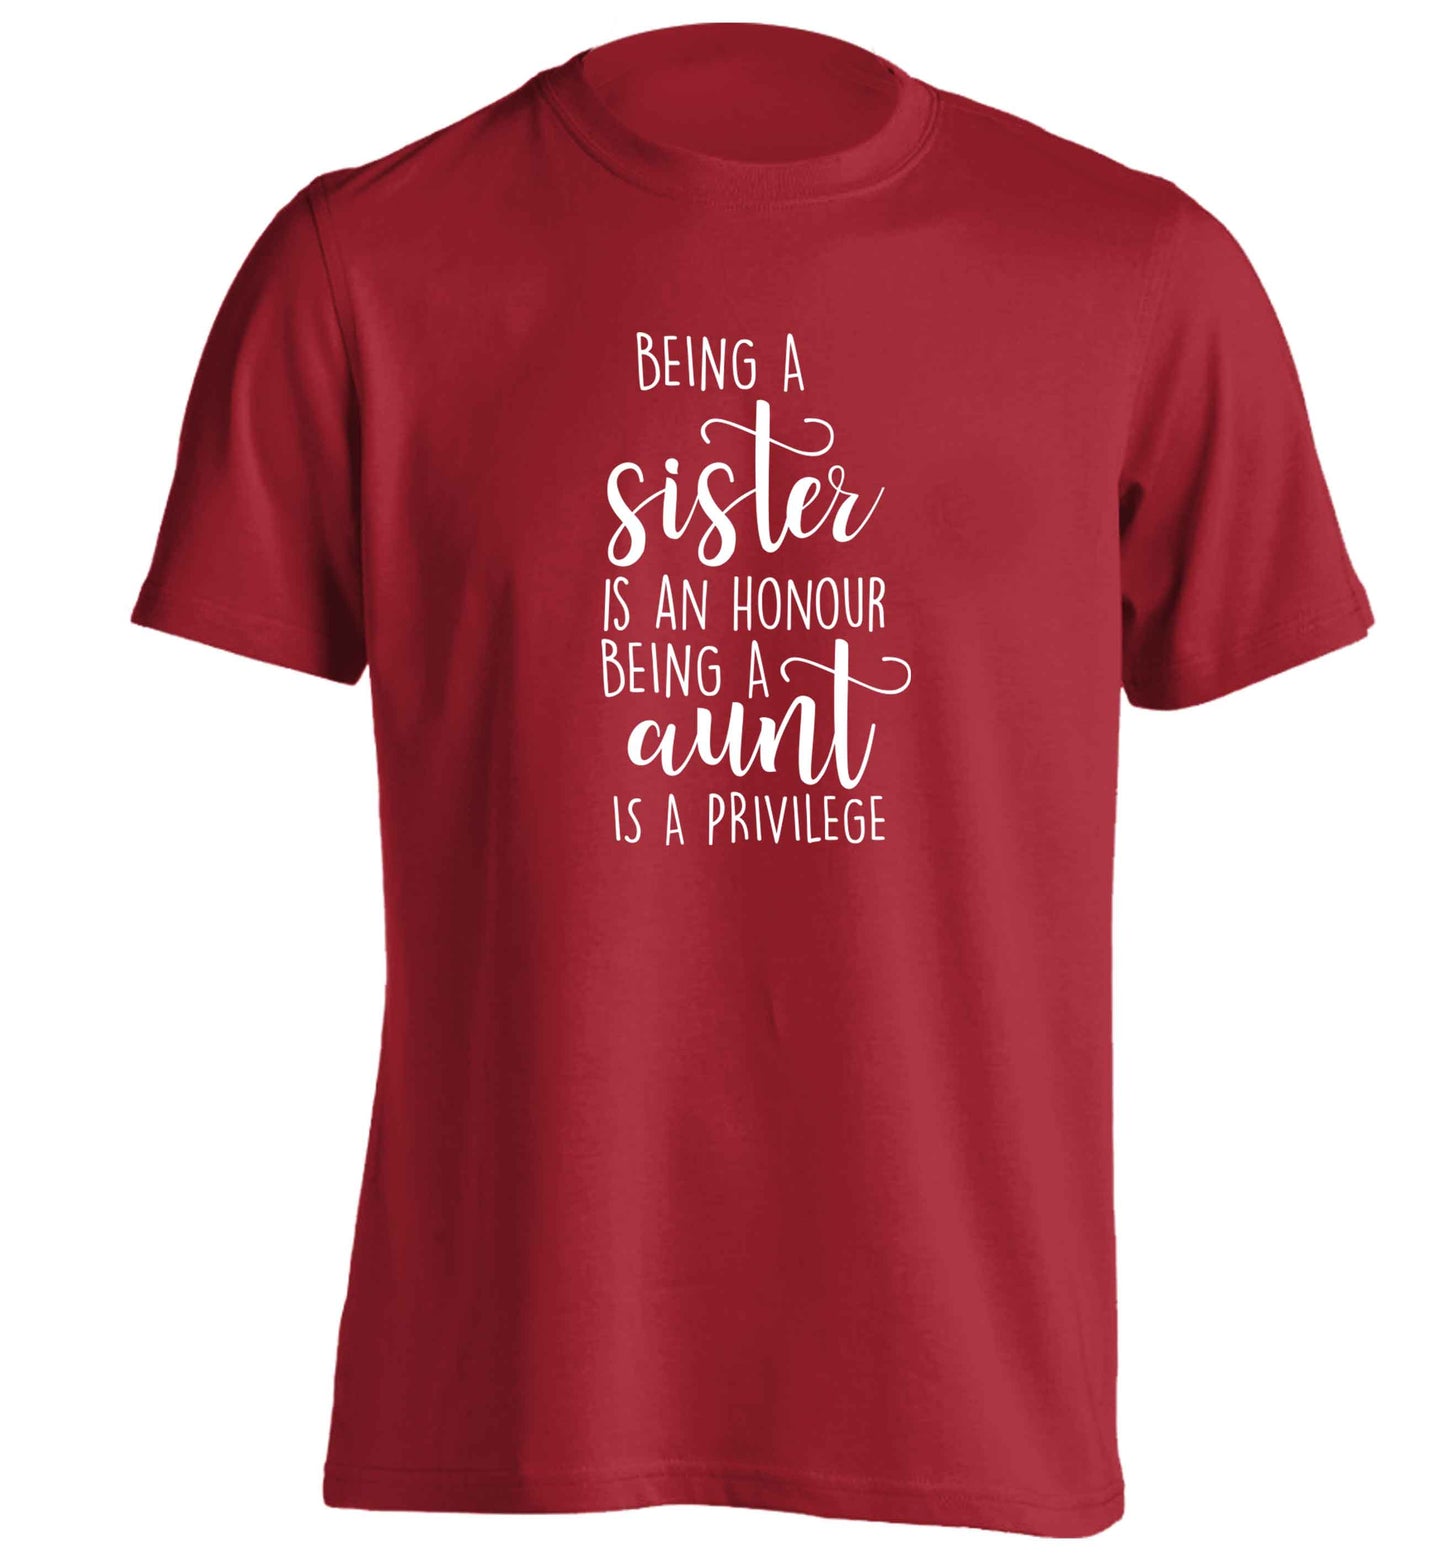 Being a sister is an honour being an auntie is a privilege adults unisex red Tshirt 2XL